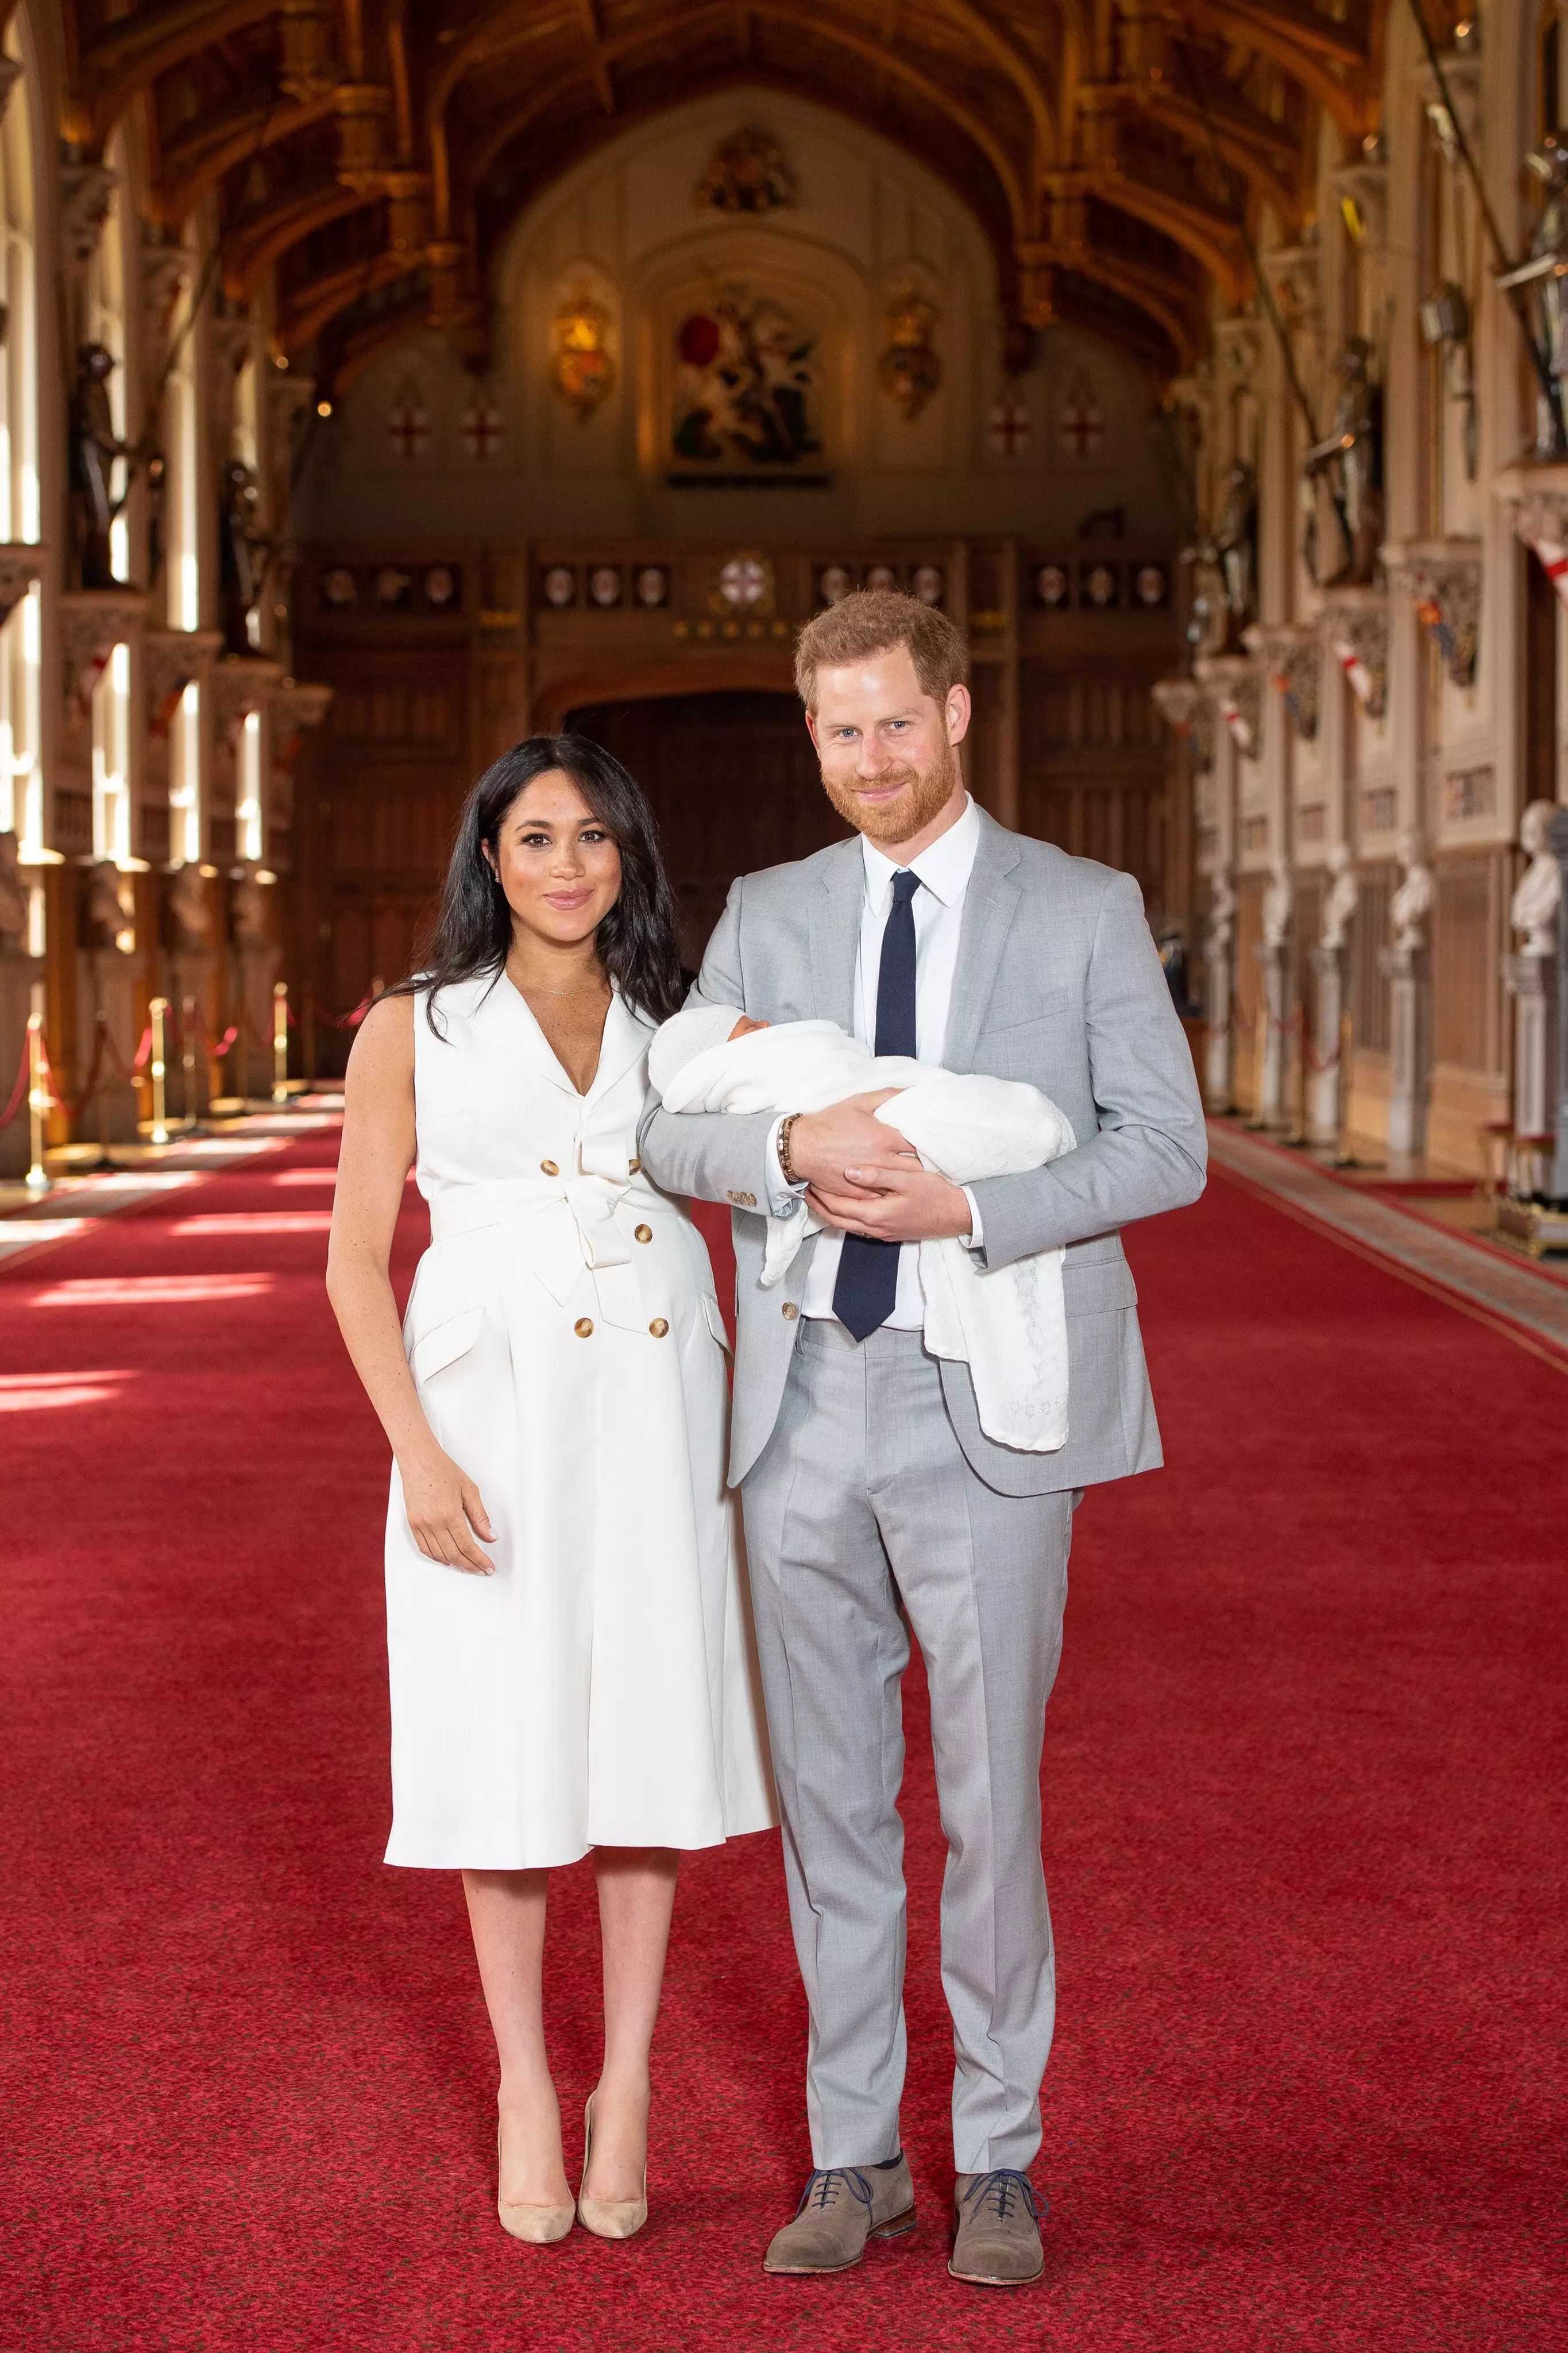 The couple took part in a photo shoot at Windsor Castle (